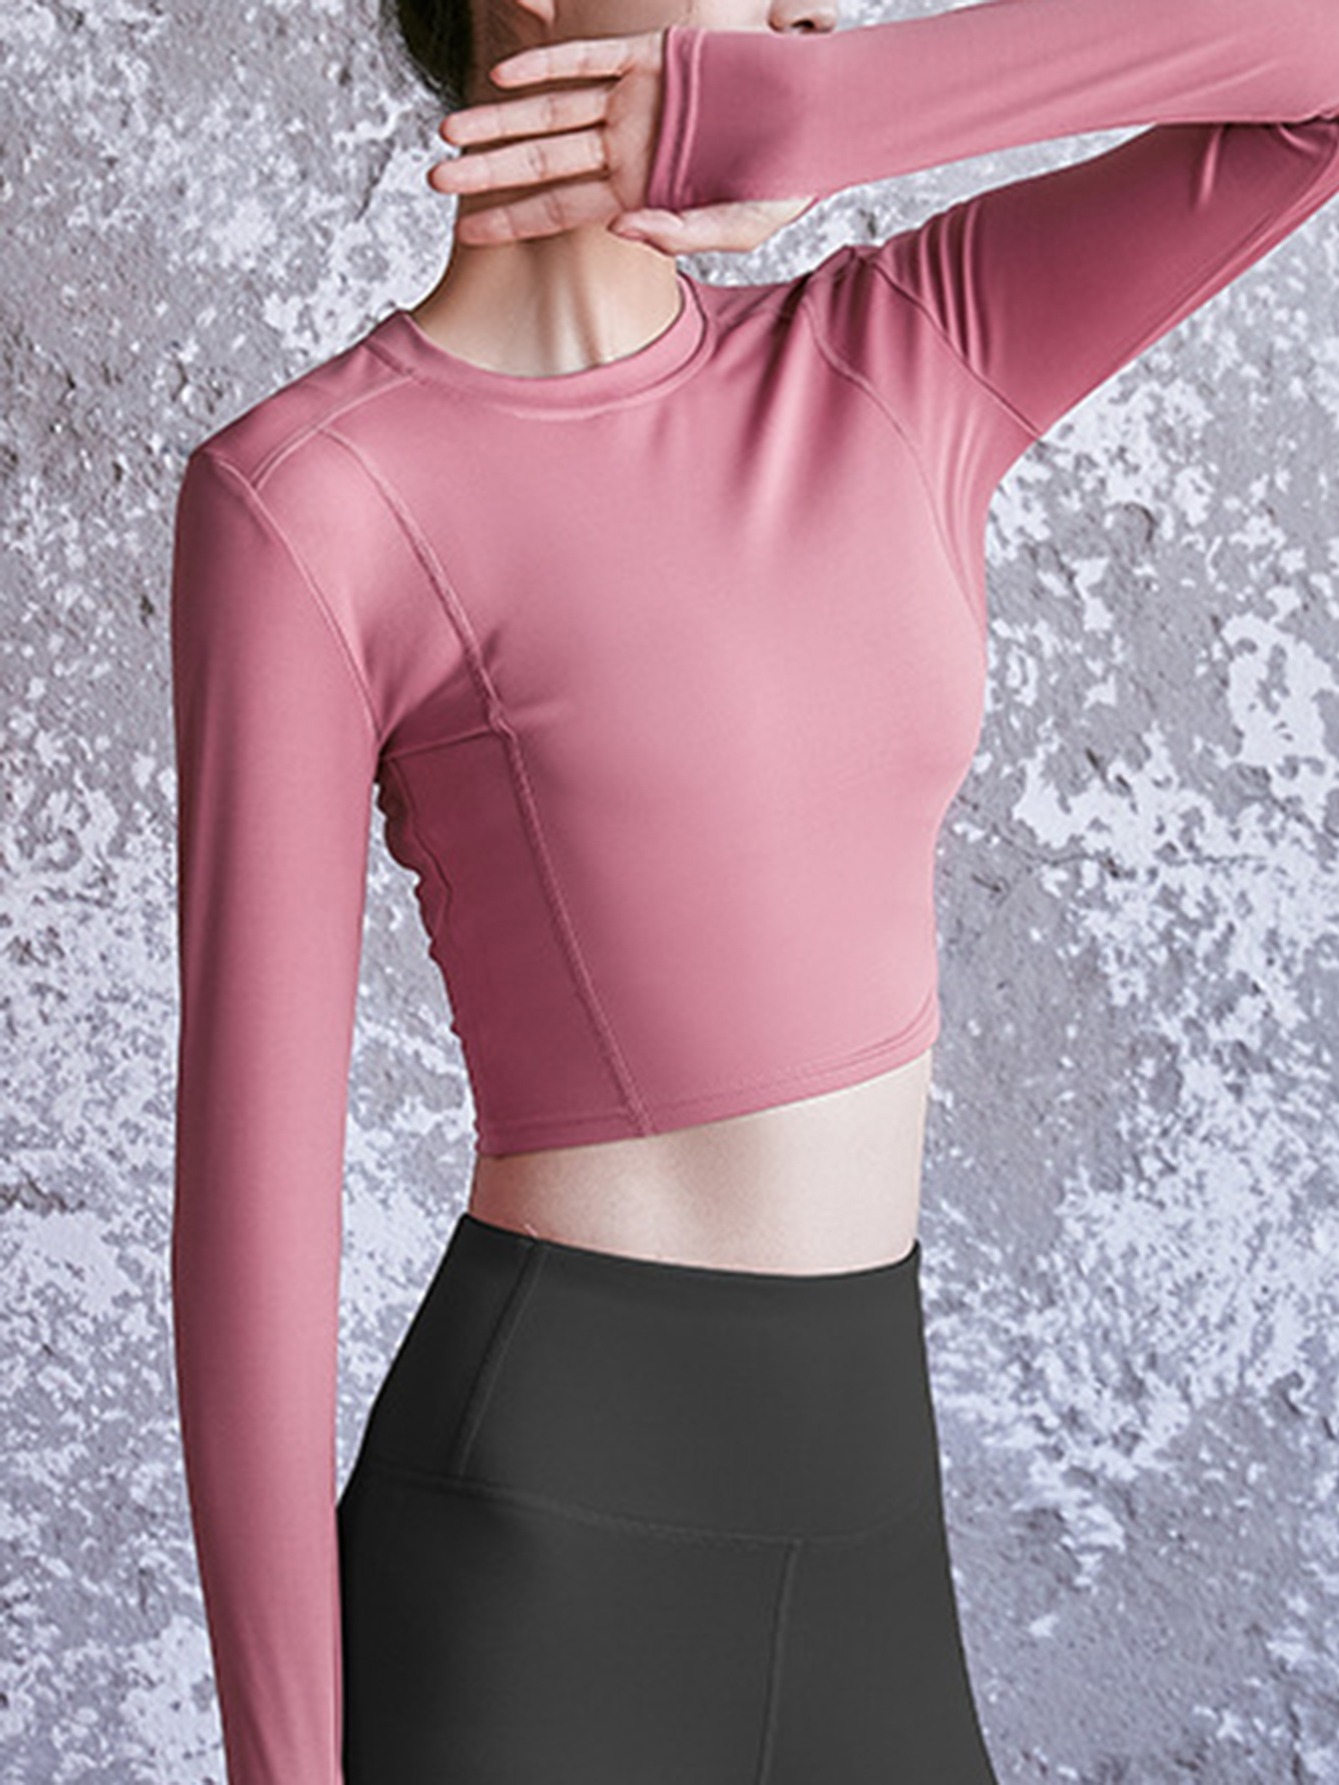 quick drying slim fit yoga sports long sleeve top solid color breathable comfortable